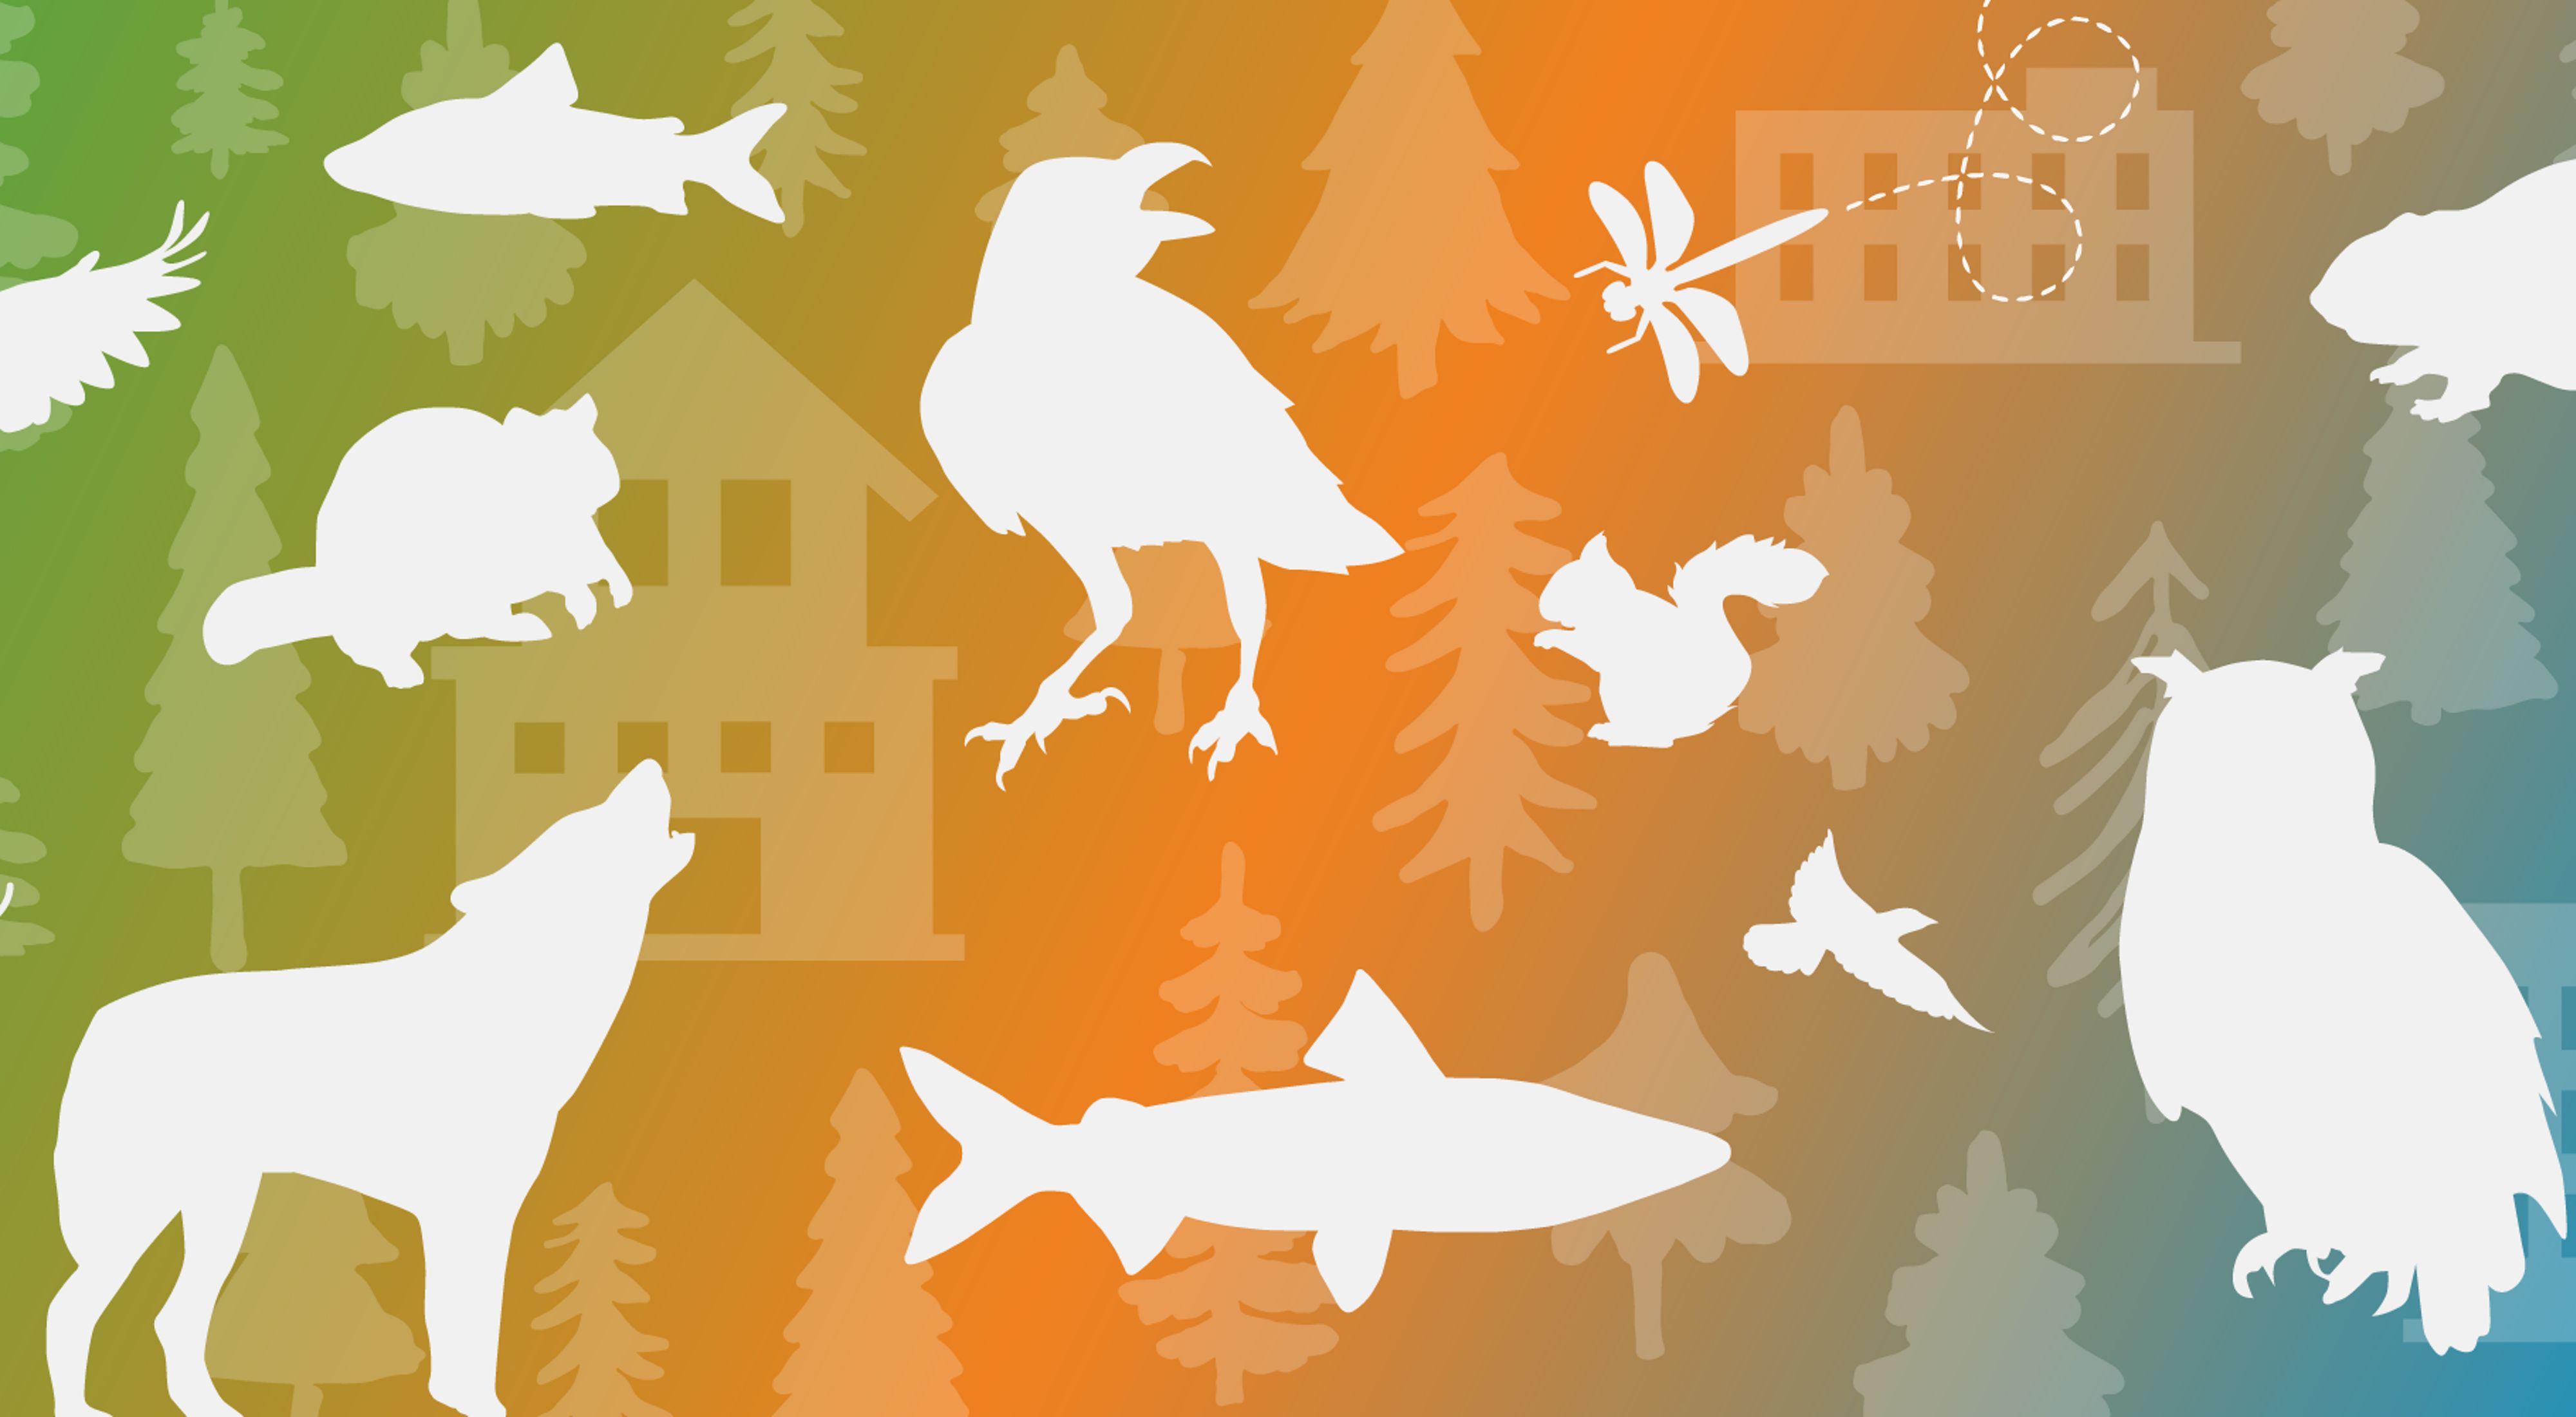 Outlines of different species of wildlife over a colorful background. 